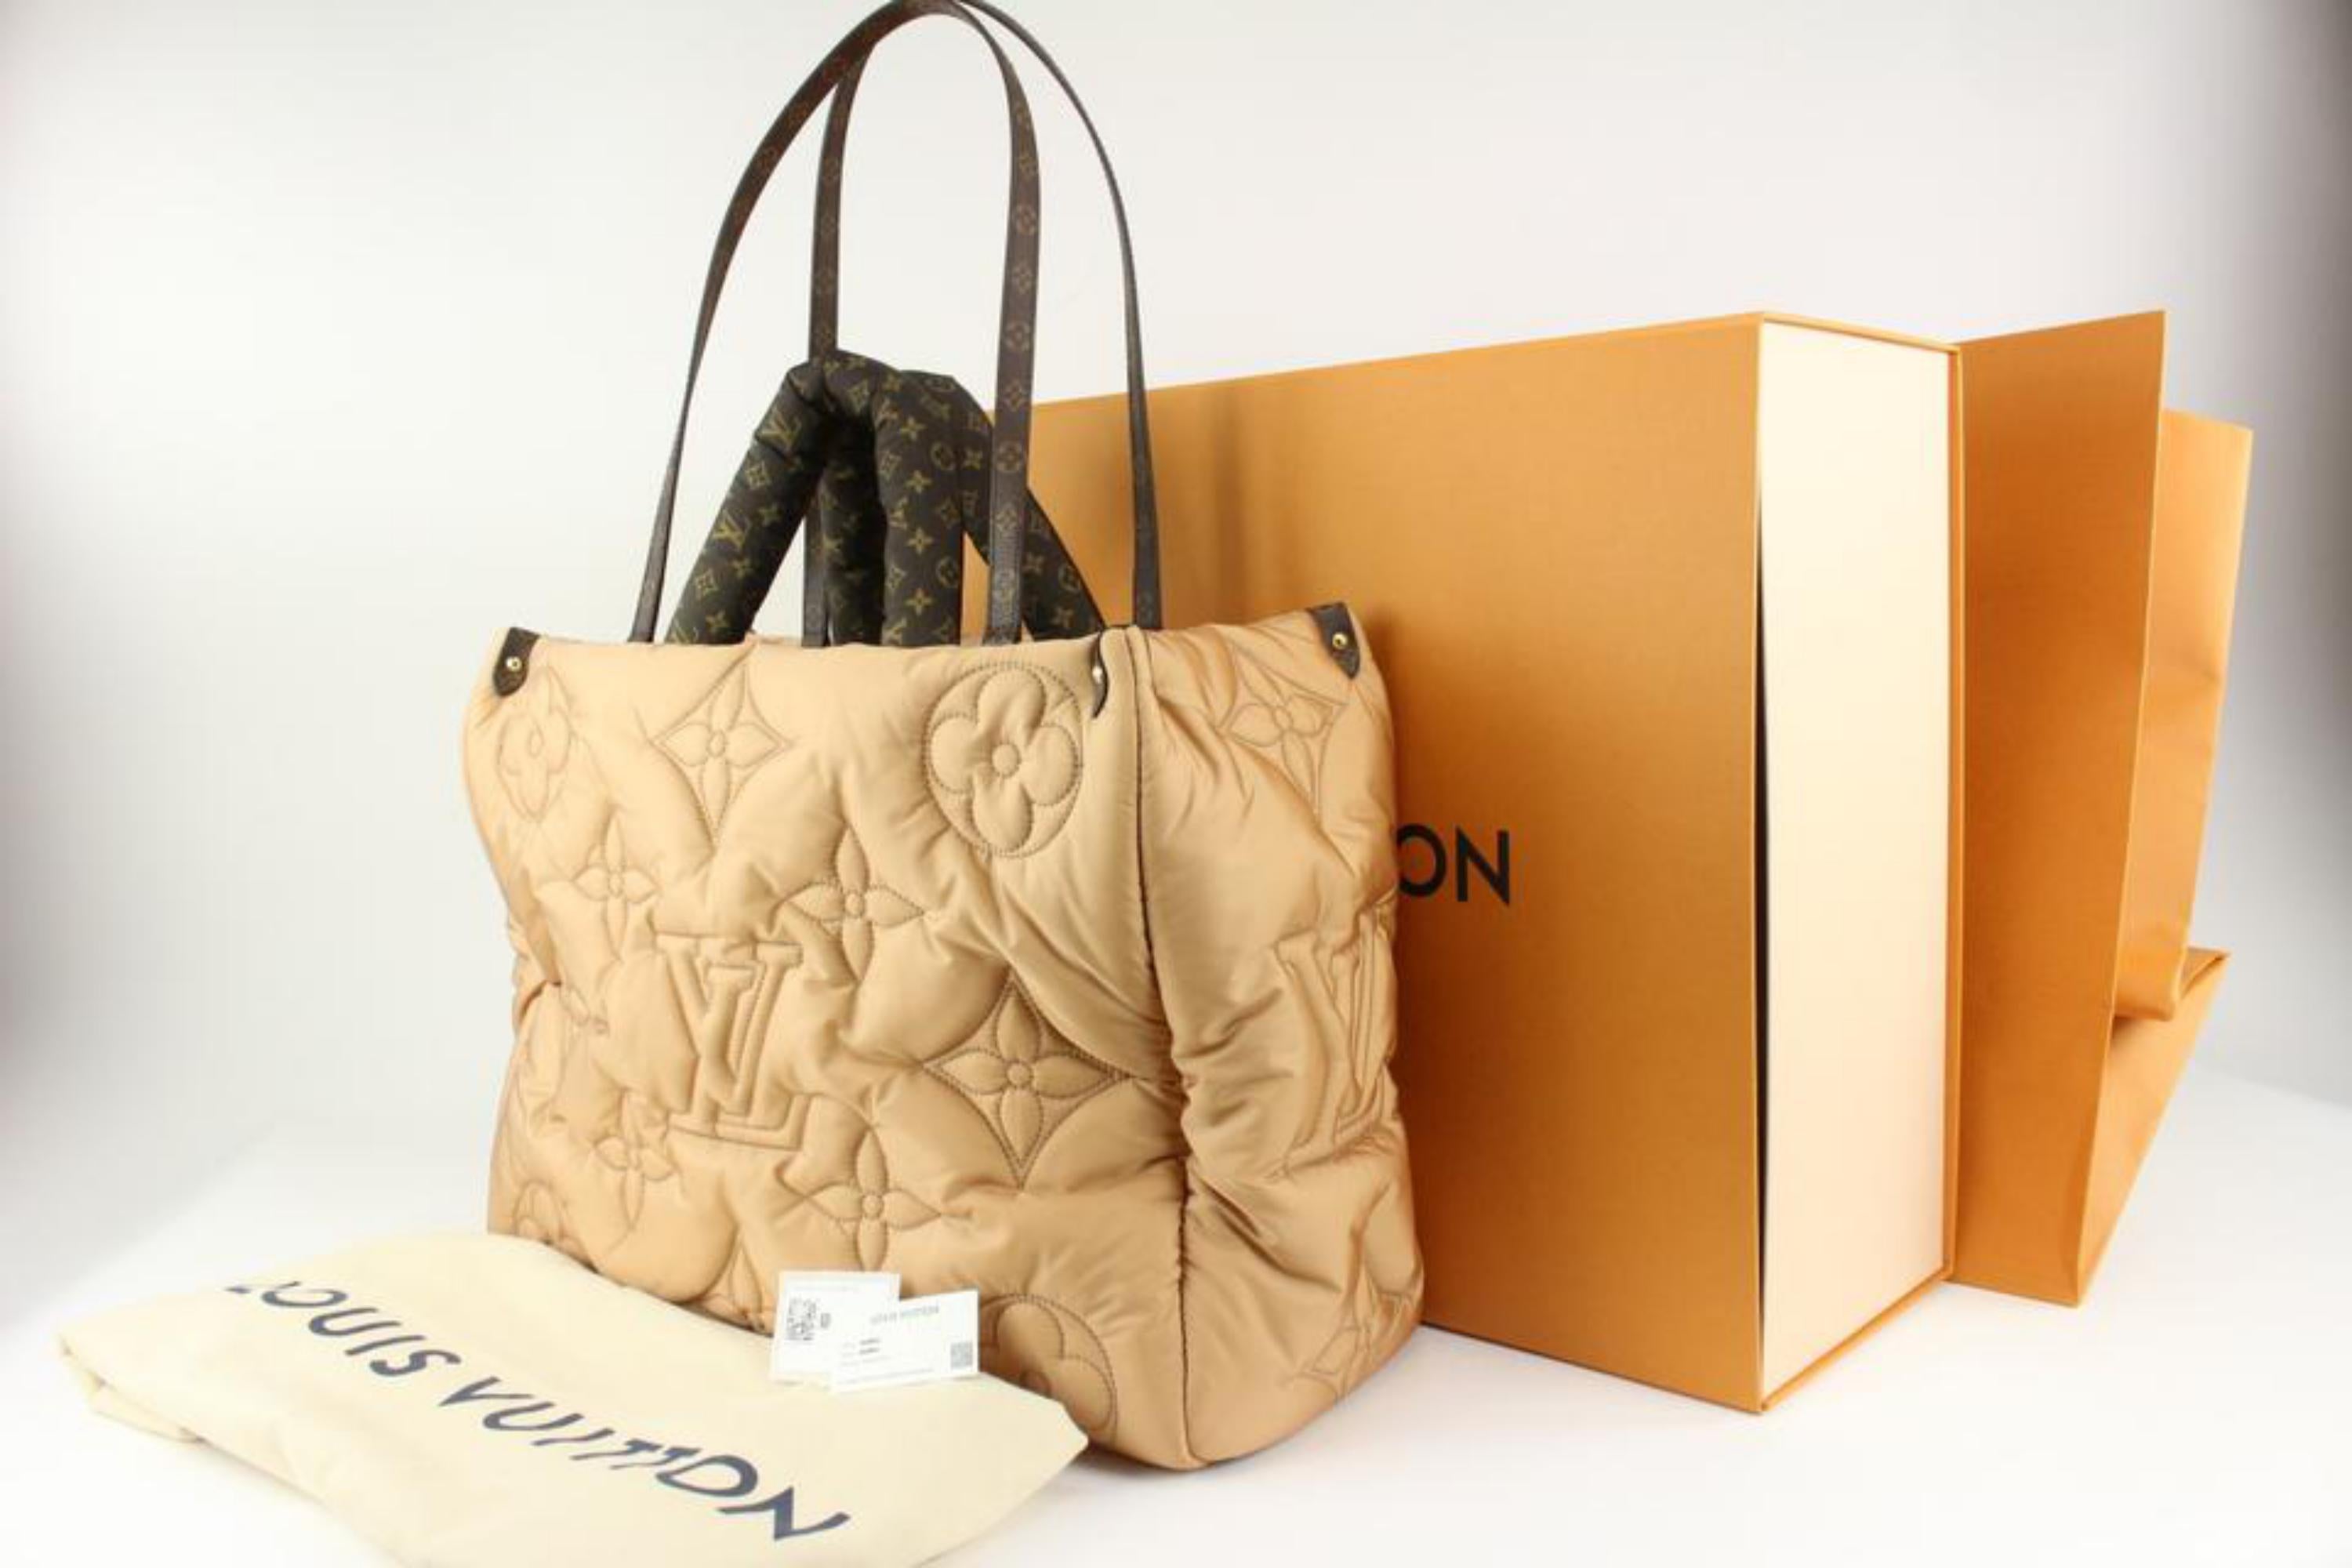 Louis Vuitton Beige Puffer Quilted Pillow Onthego GM 2way Tote Bag 1122lv1
Date Code/Serial Number: RFID Chip
Made In: Italy
Measurements: Length:  15